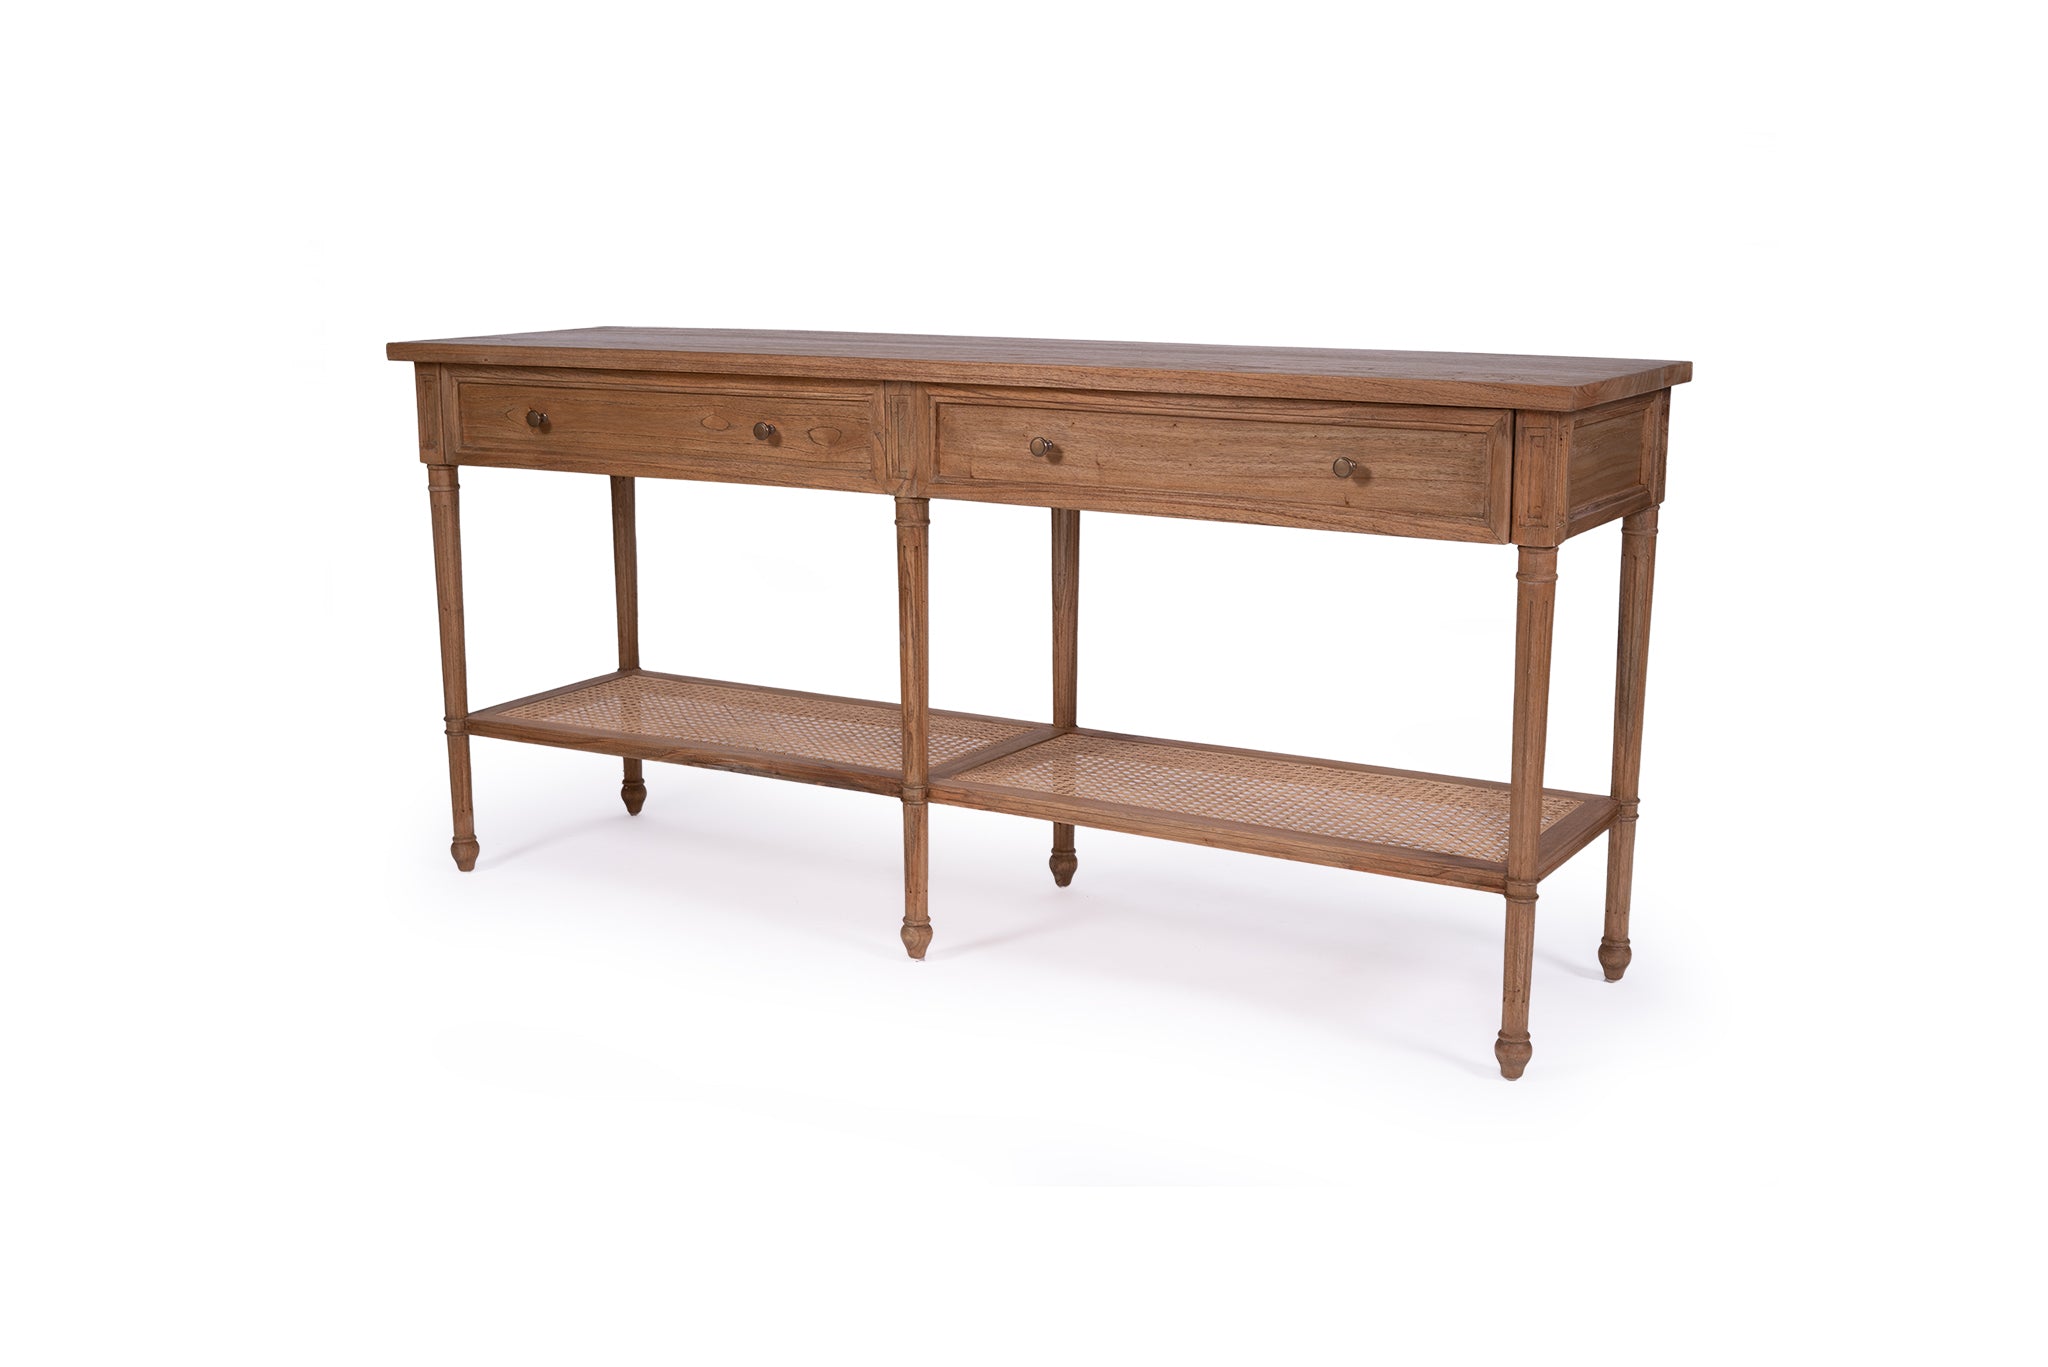 Vaucluse Mahogany & Rattan Wide Console Table – Weathered Oak – 185cm